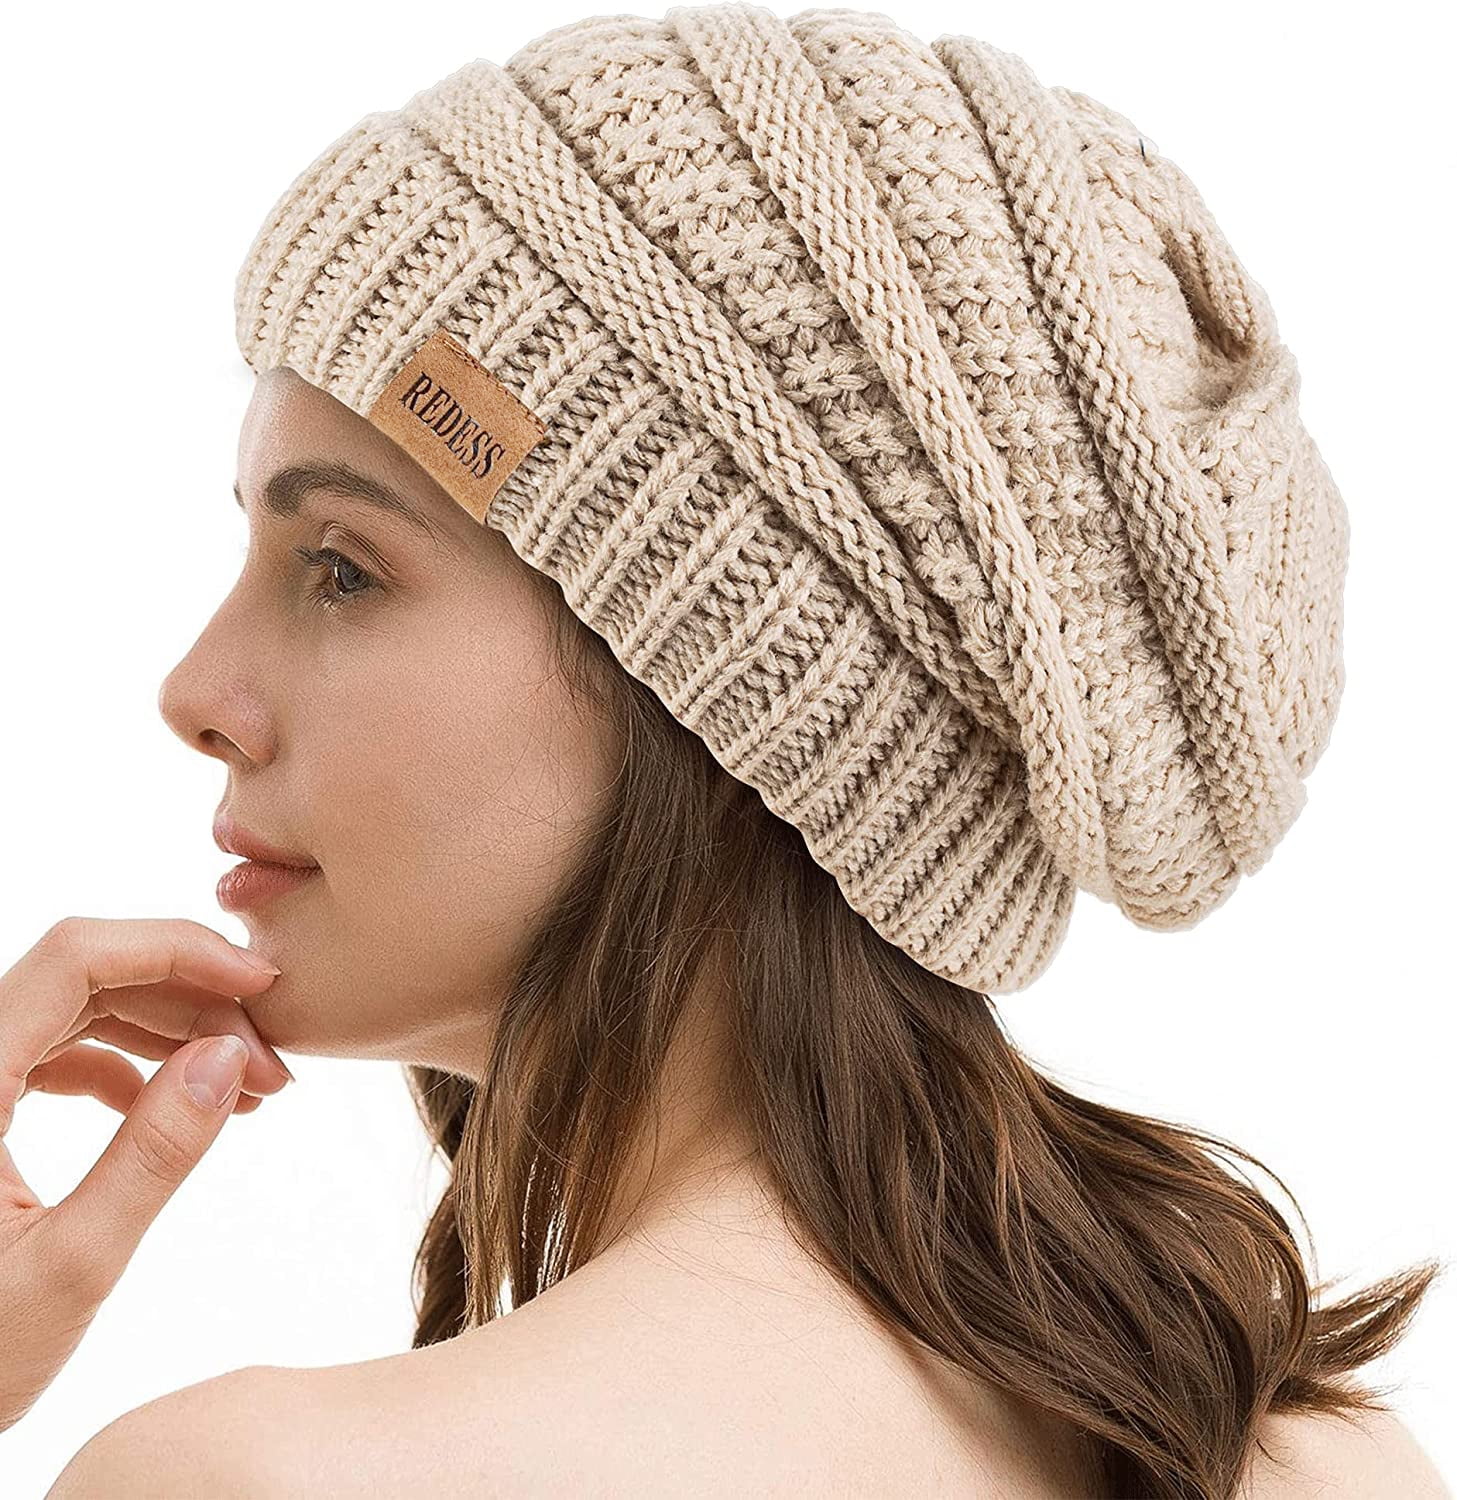 CC Slouchy Yarn Pom Beanie One Size Fits Most Adults / Brown